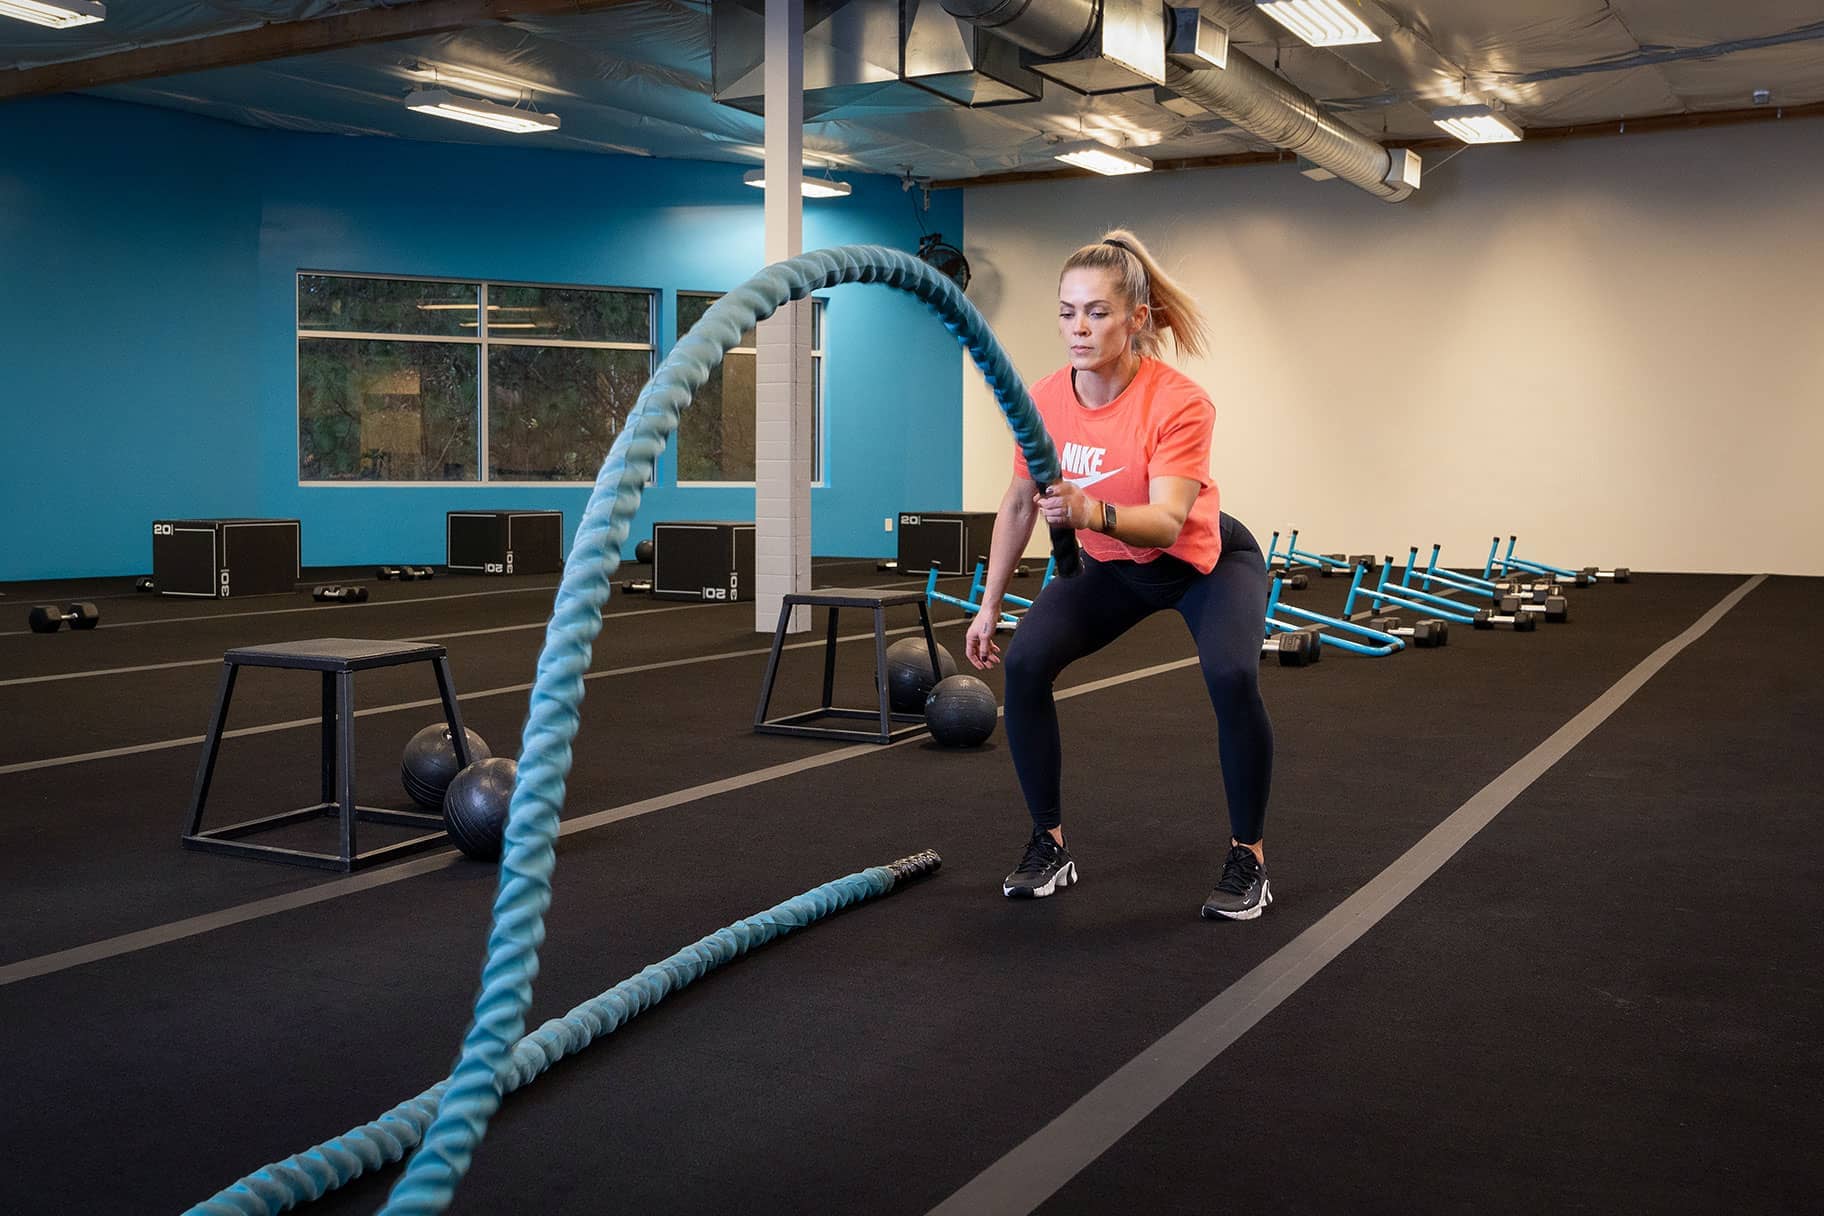 How to Choose Battle Ropes: Tips From a Trainer